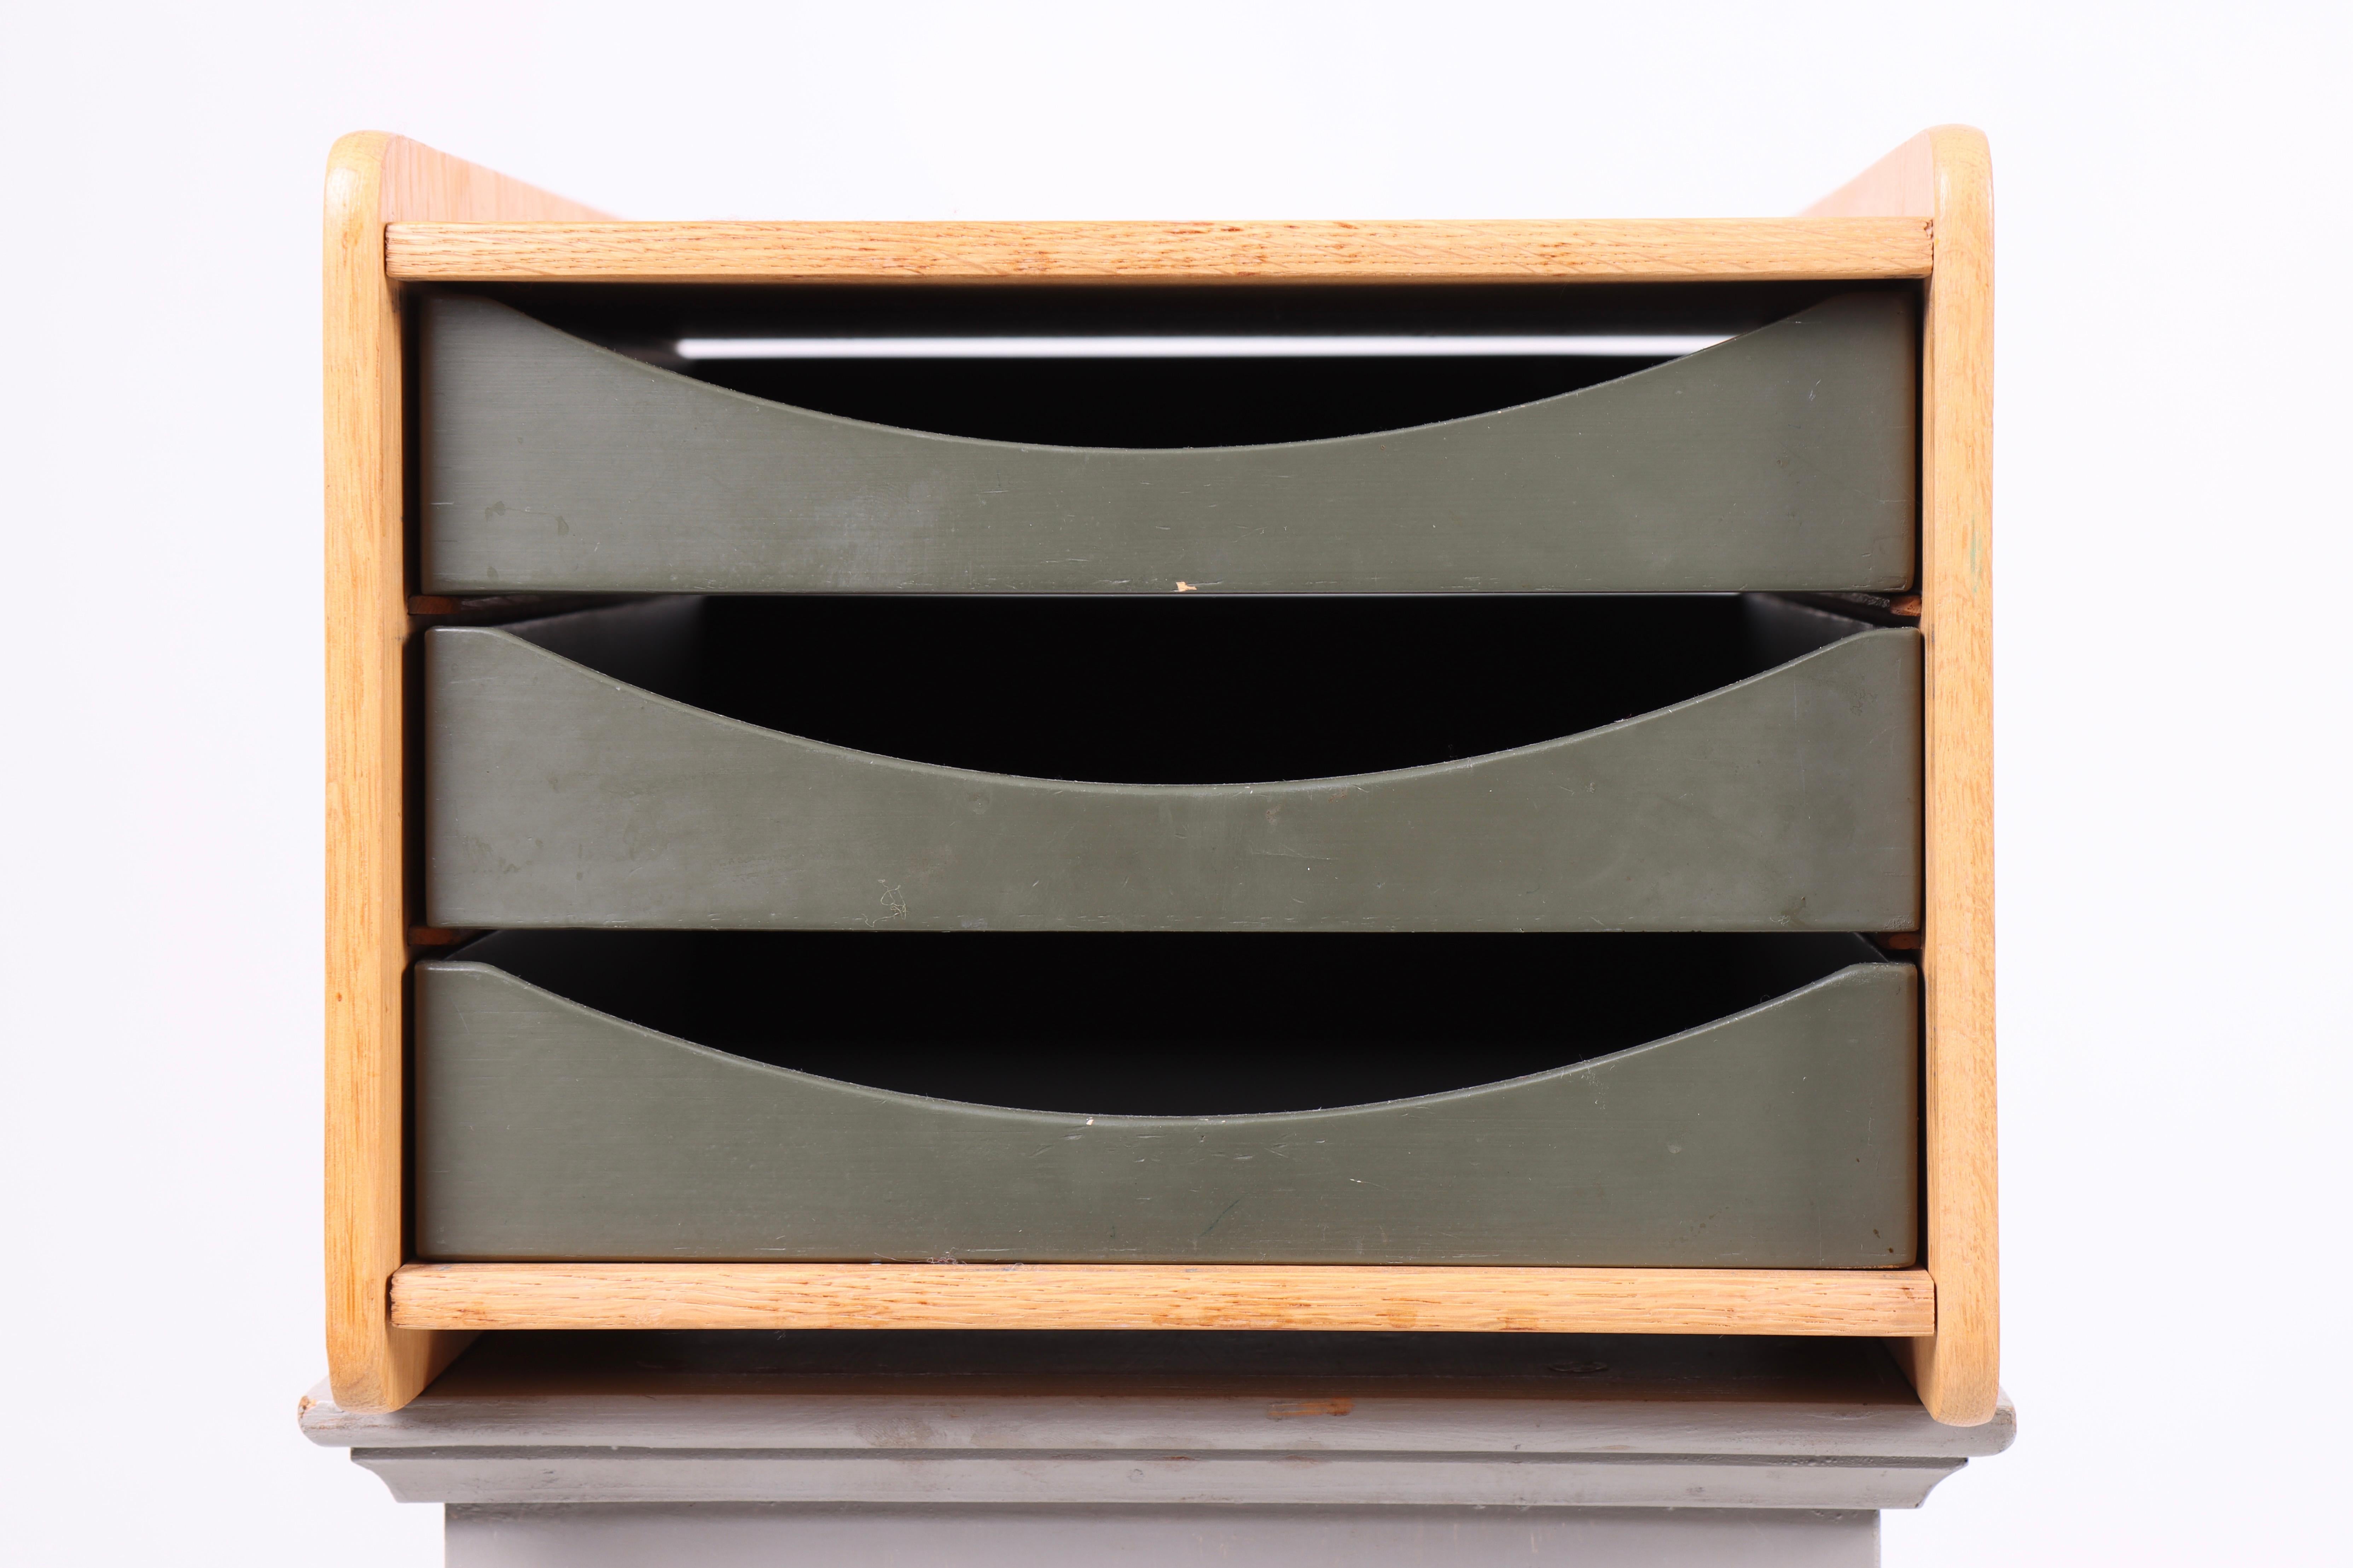 Original desk organizer designed by Maa. Børge Mogensen for Karl Andersson in the 1950s. Made in Denmark. Great condition.